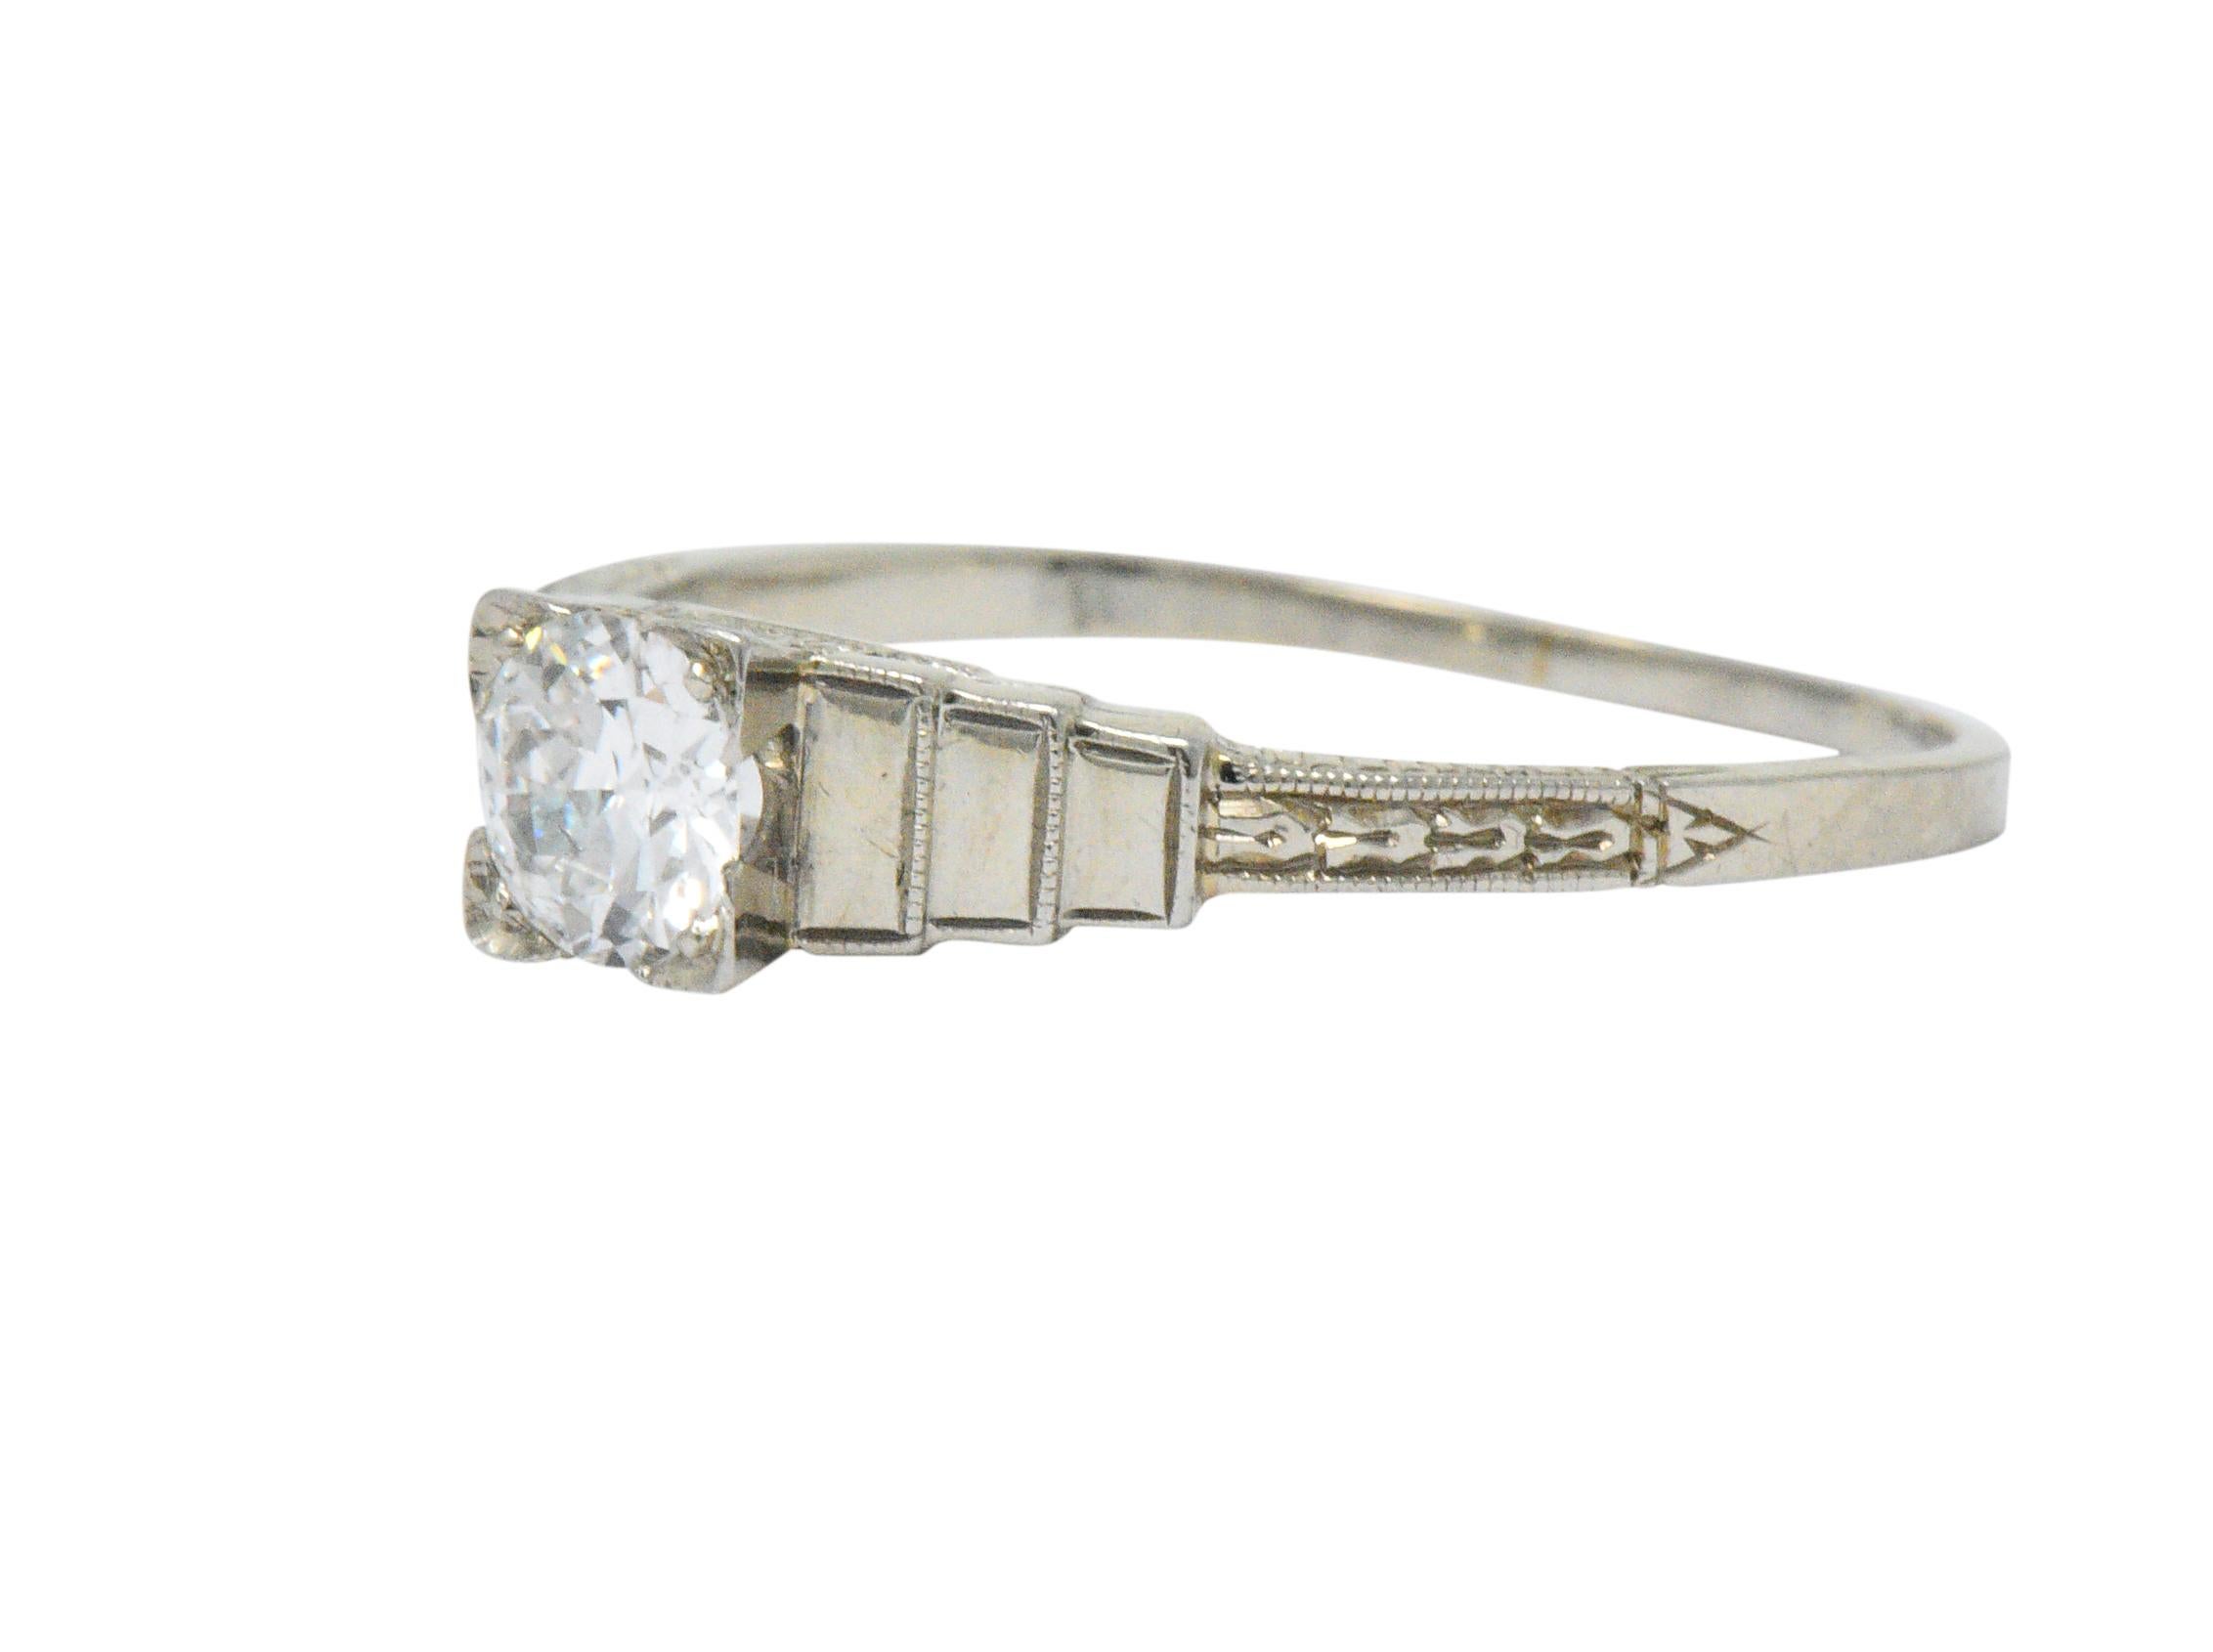 Centering an old European cut diamond, set in a square form head, weighing approximately 0.40 carat; G color with SI clarity

Flanked by a stepped rectangle motif, graduating in size

Completed by a deeply engraved foliate shank

Ring Size: 8 &